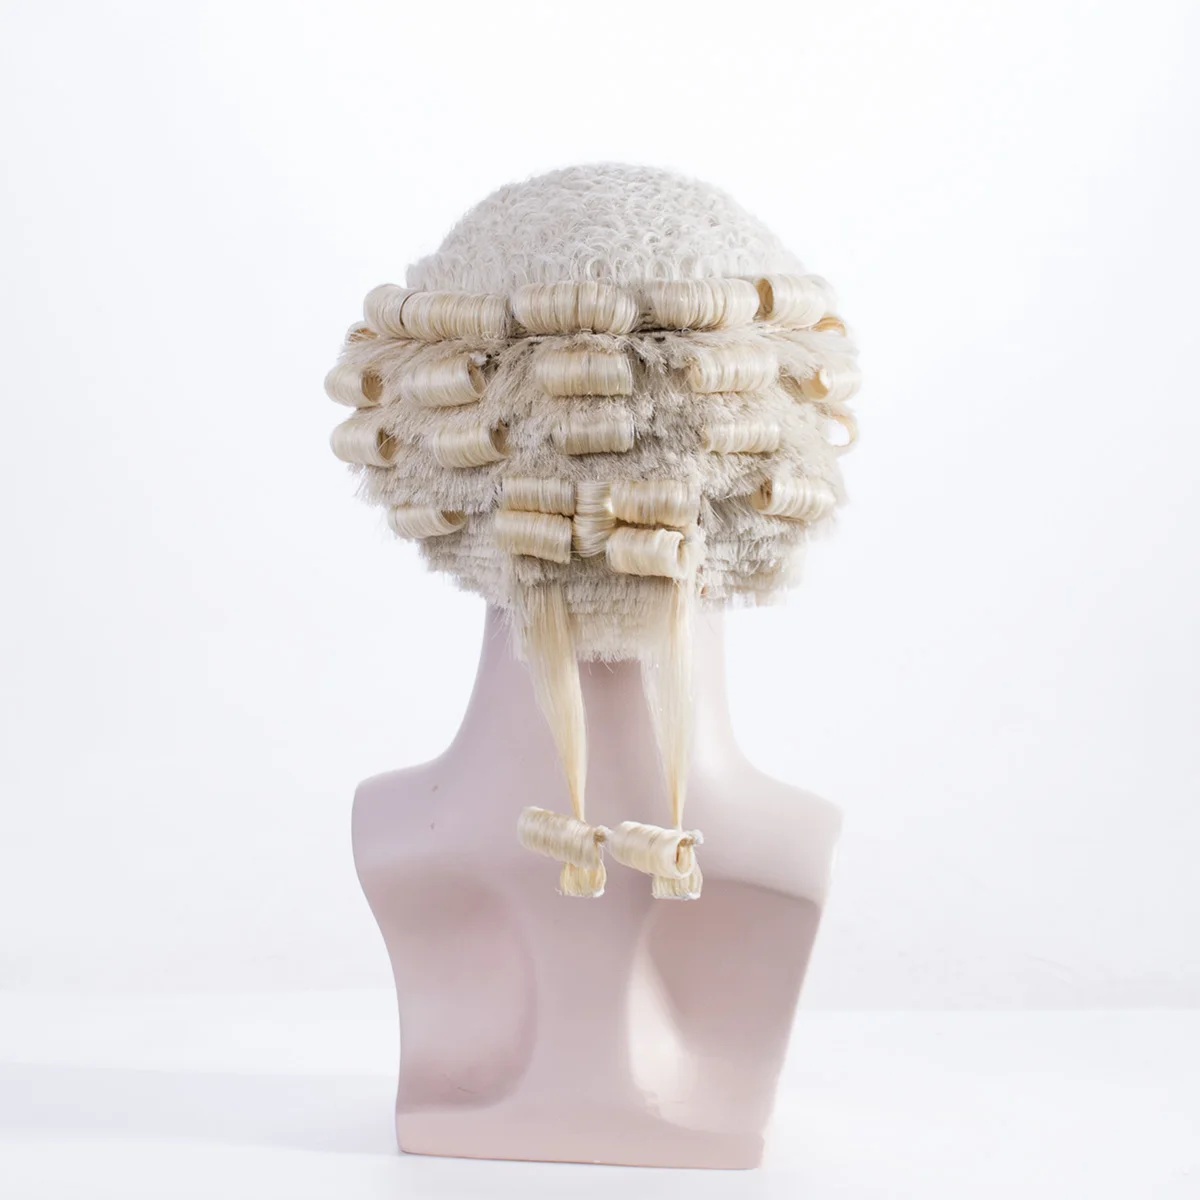 Aishili Full Hand-made Barrister Wigs Lawyer Wig With Horse Hair Judge Wig  For Formal Use In Court And Costume - Buy Hand Made Lawyer Wig Horse Hair  For Formal Use In Court